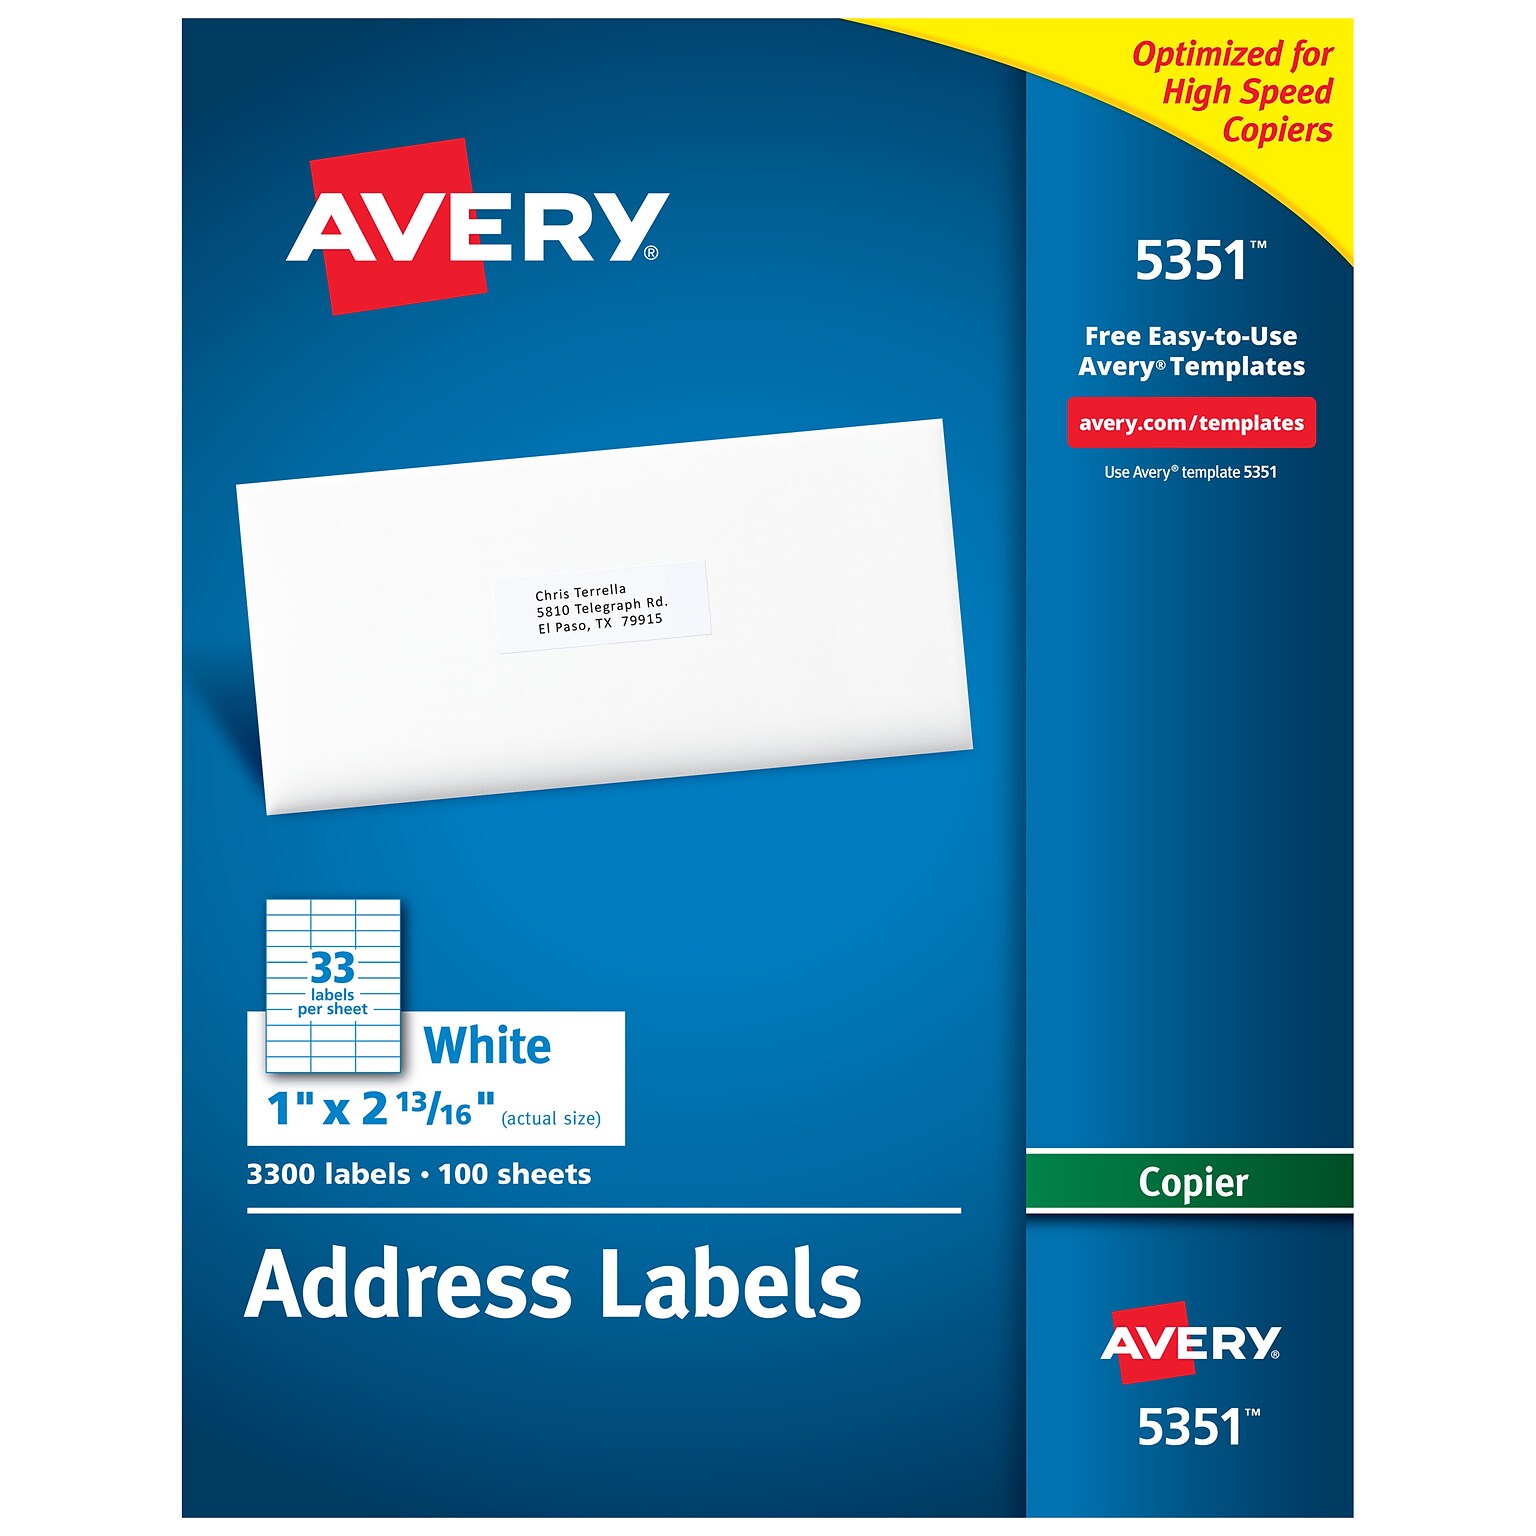 Avery Address Labels for Copiers, 1 x 2-13/16, White, 33 Labels/Sheet, 100 Sheets/Box   (5351)